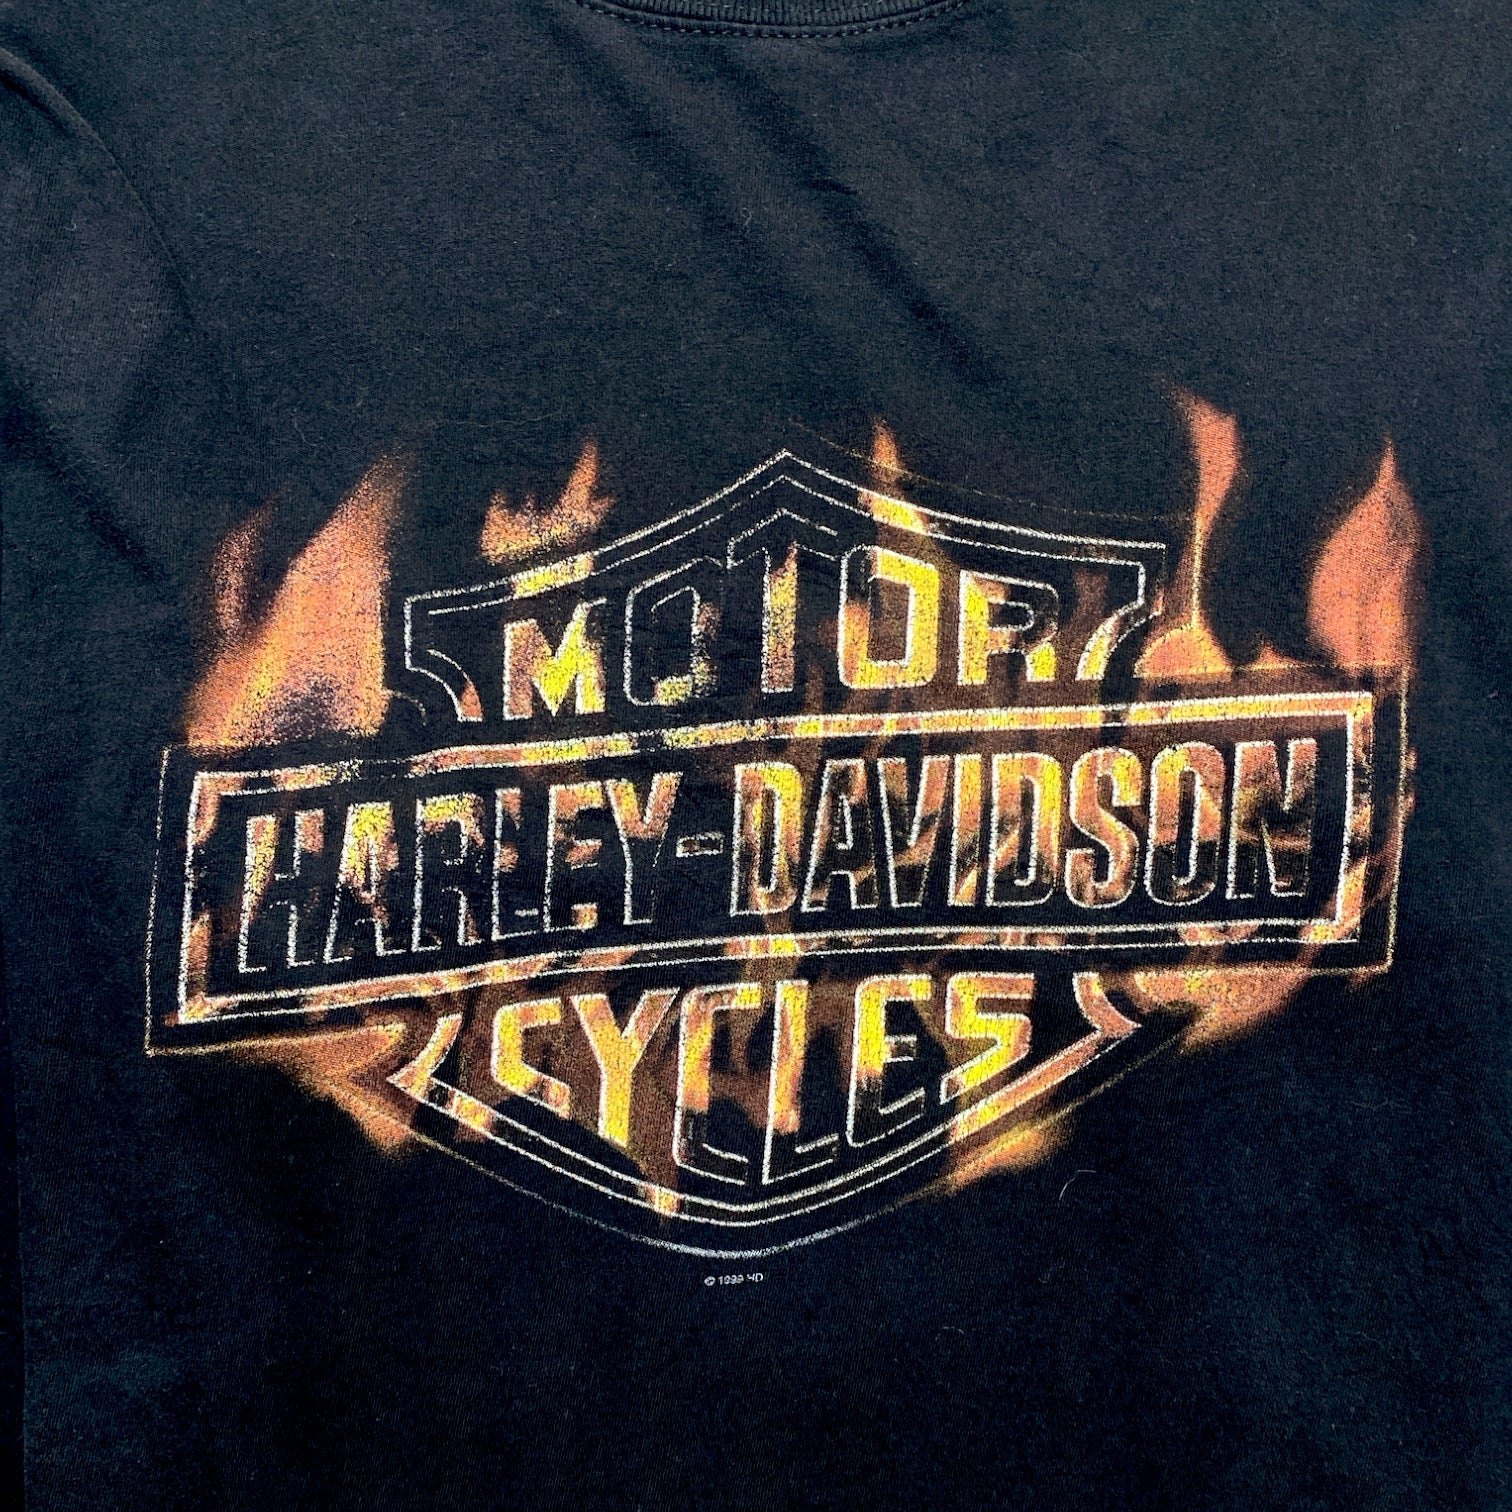 MOTOR HARLEY-DAVIDSON CYCLES FLAME FIRE LOGO L/S Tee Made in USA